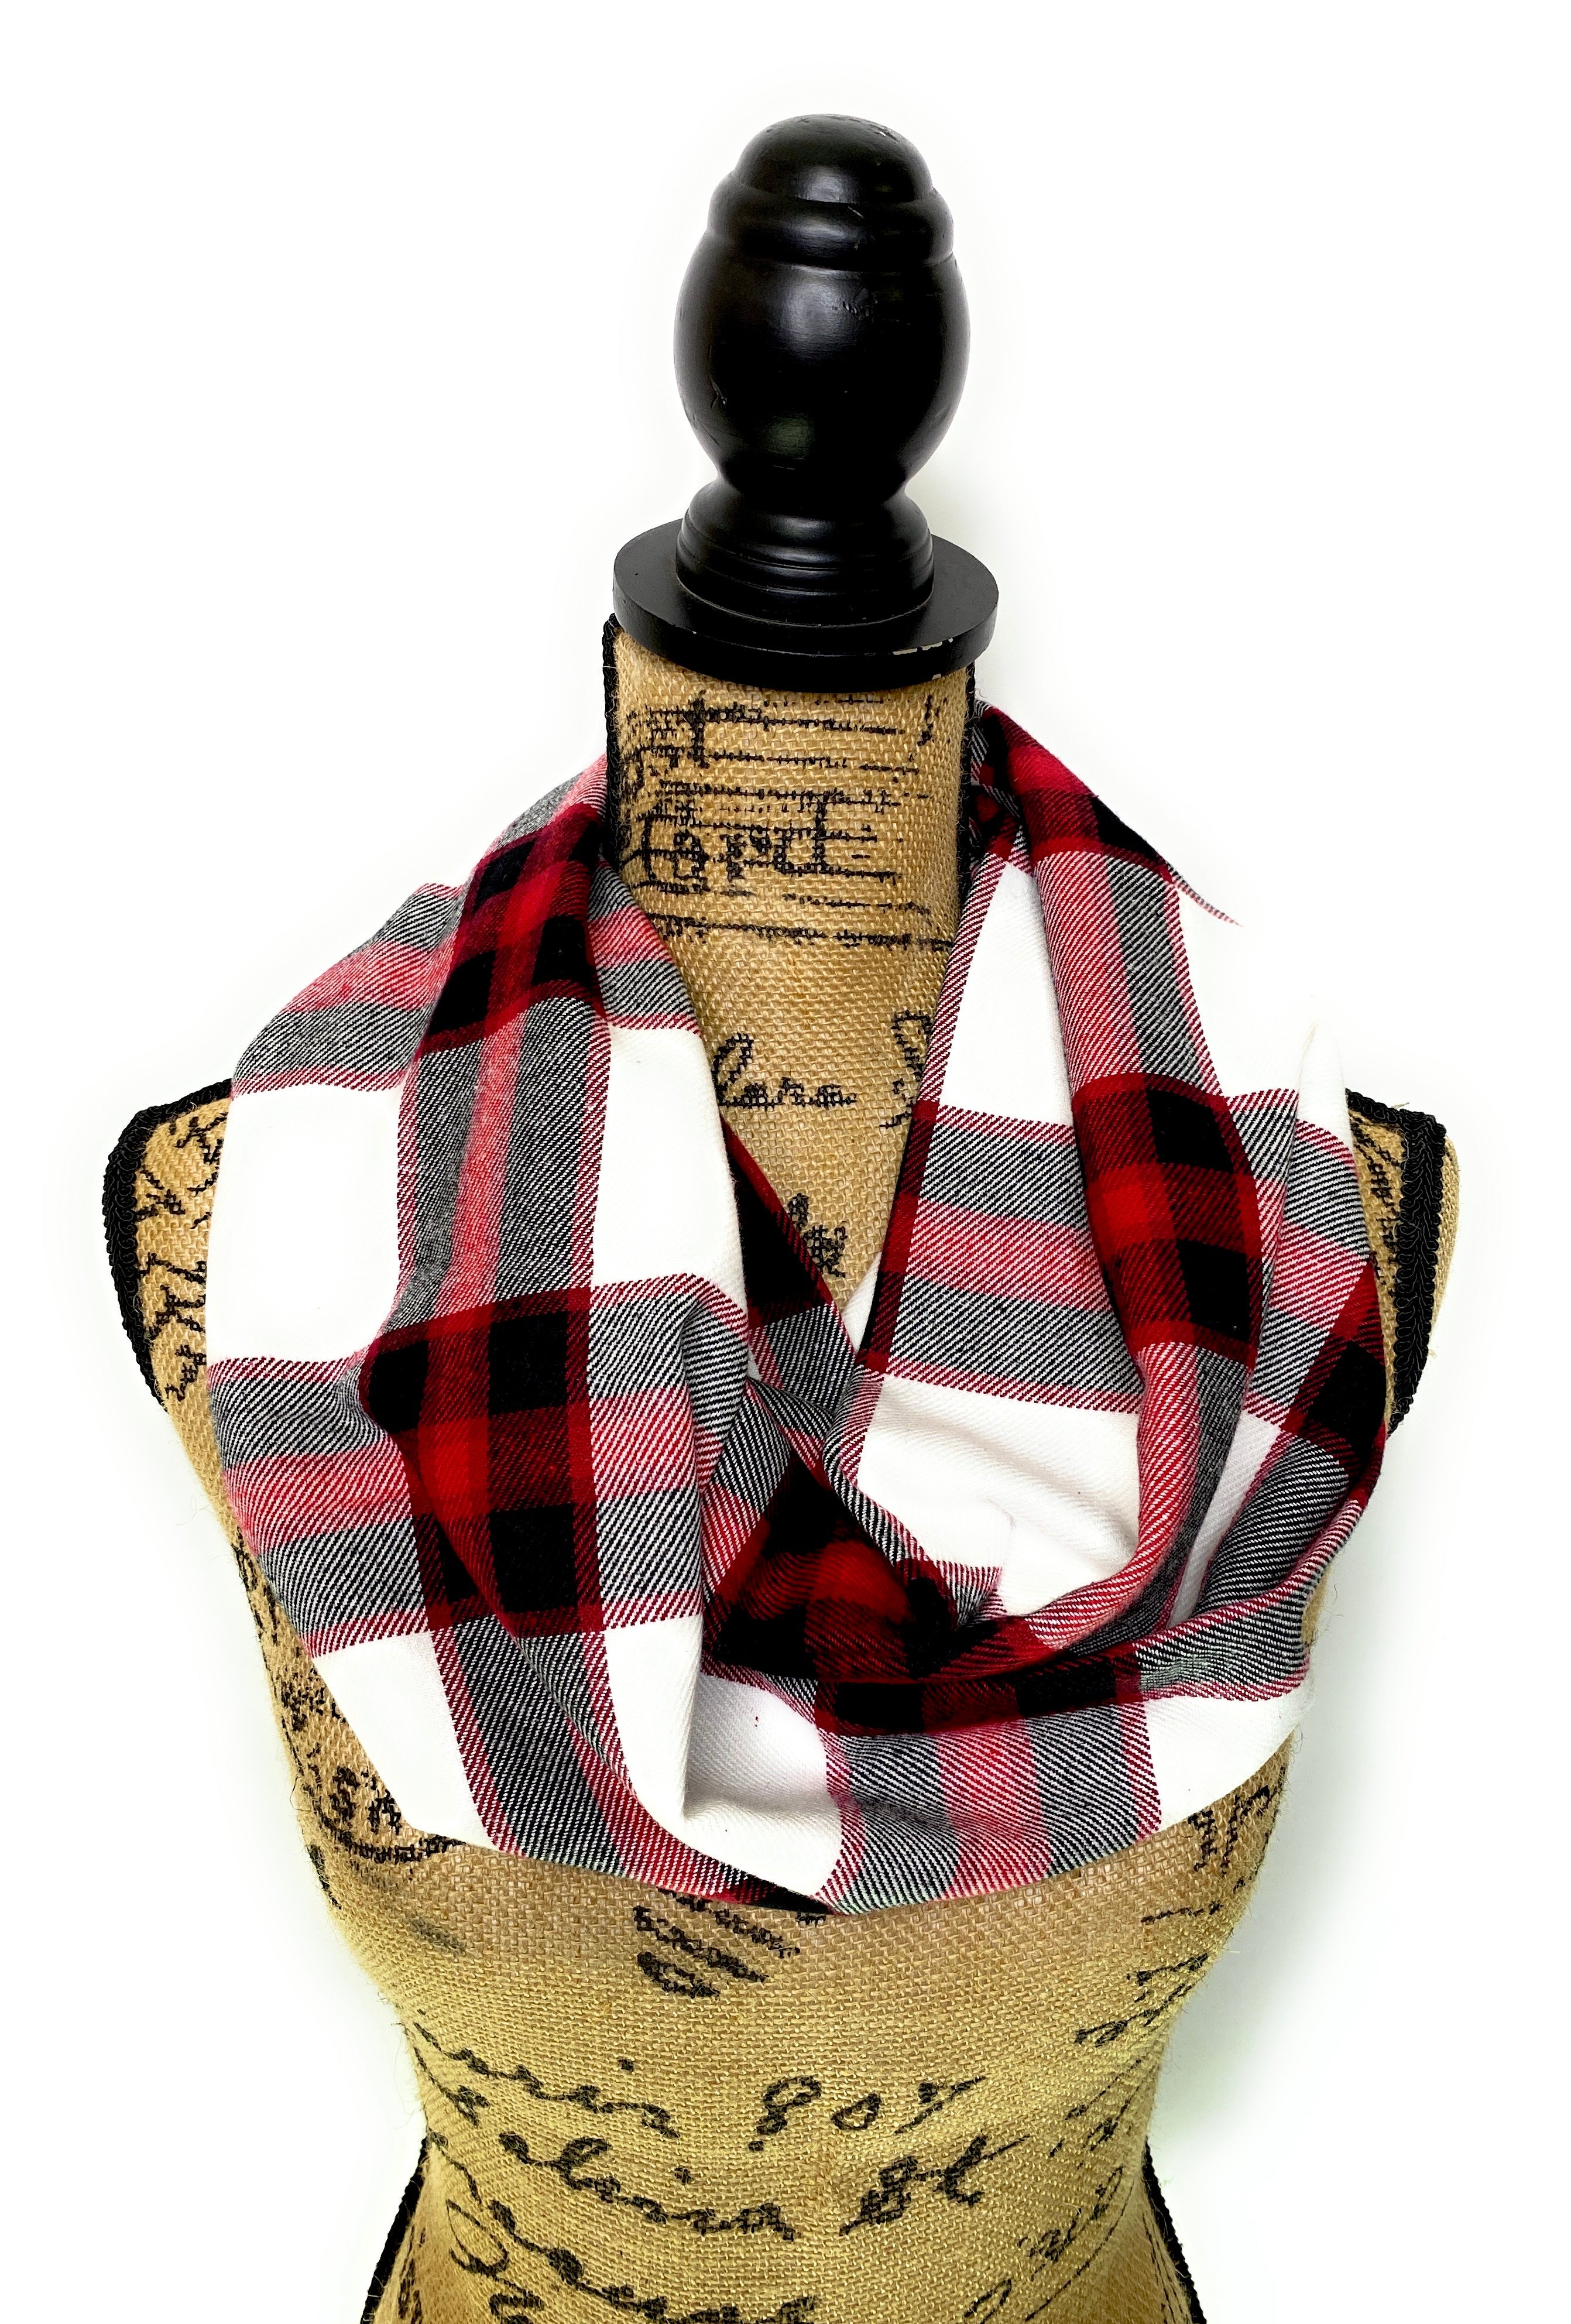 Black and White with Maroon and Cranberry Red Accents Plaid Infinity and Blanket Scarves